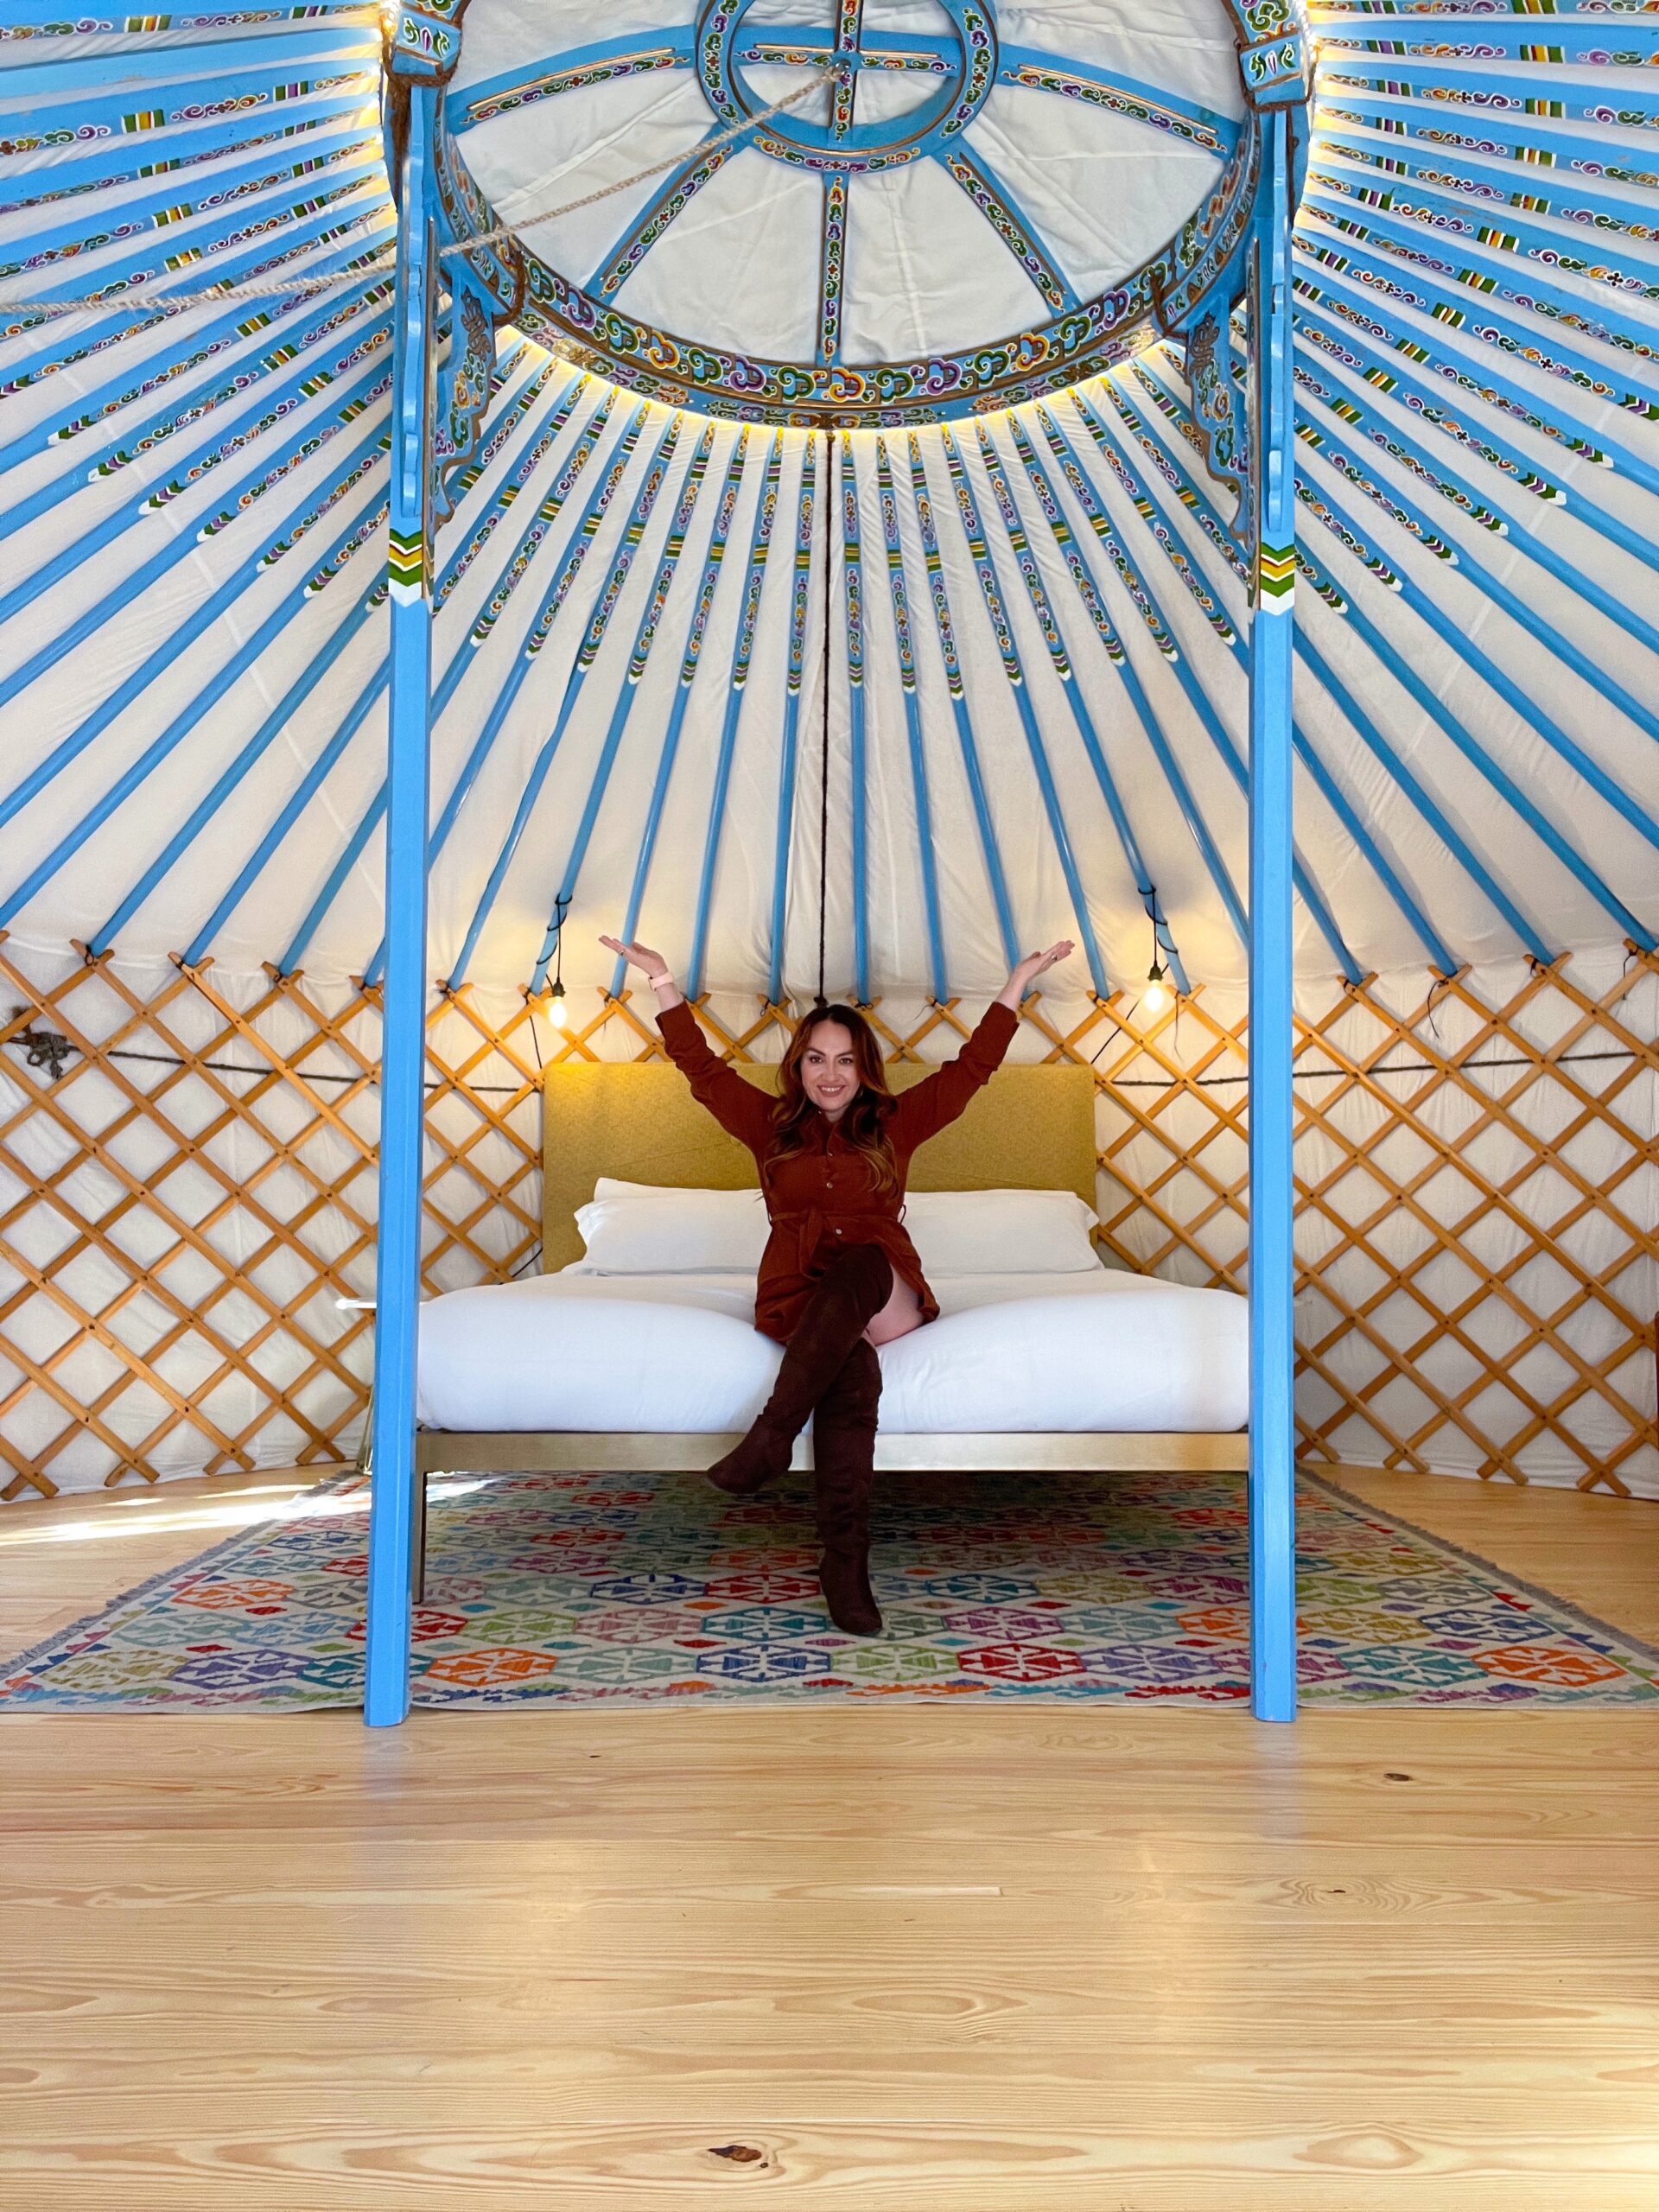 Are Glamping Yurts Yet Another Cultural Appropriation in The West?